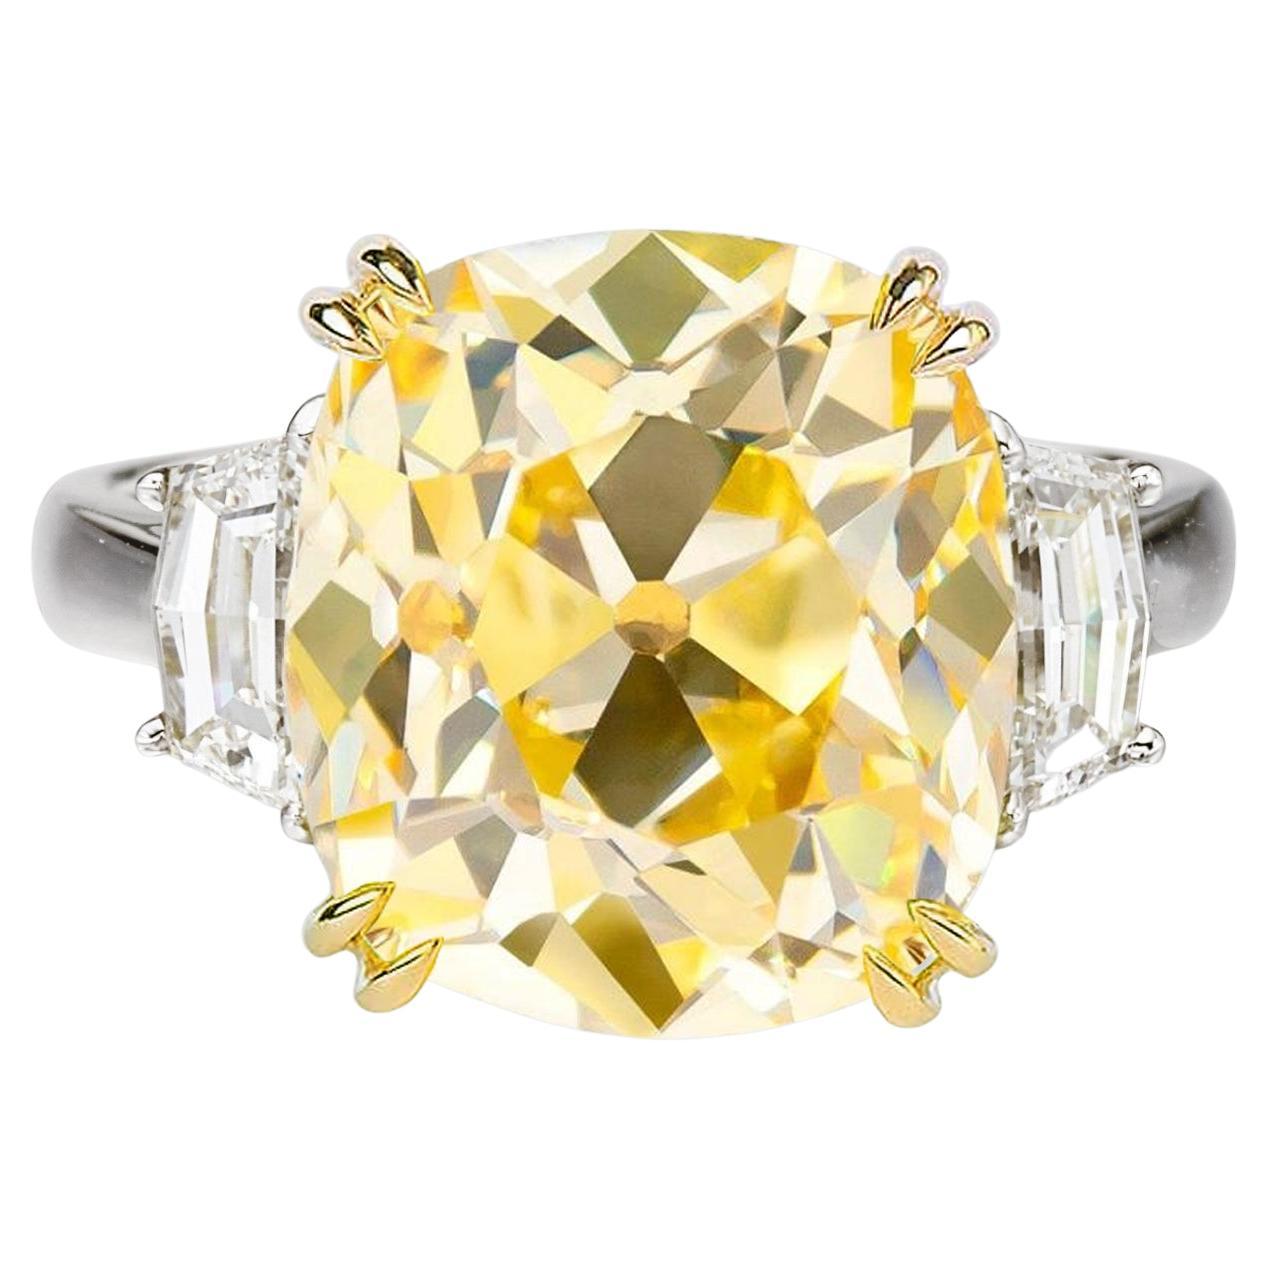 GIA Certified 3 Carat Fancy Intense Yellow Old Mine Cut Diamond Solitaire Ring